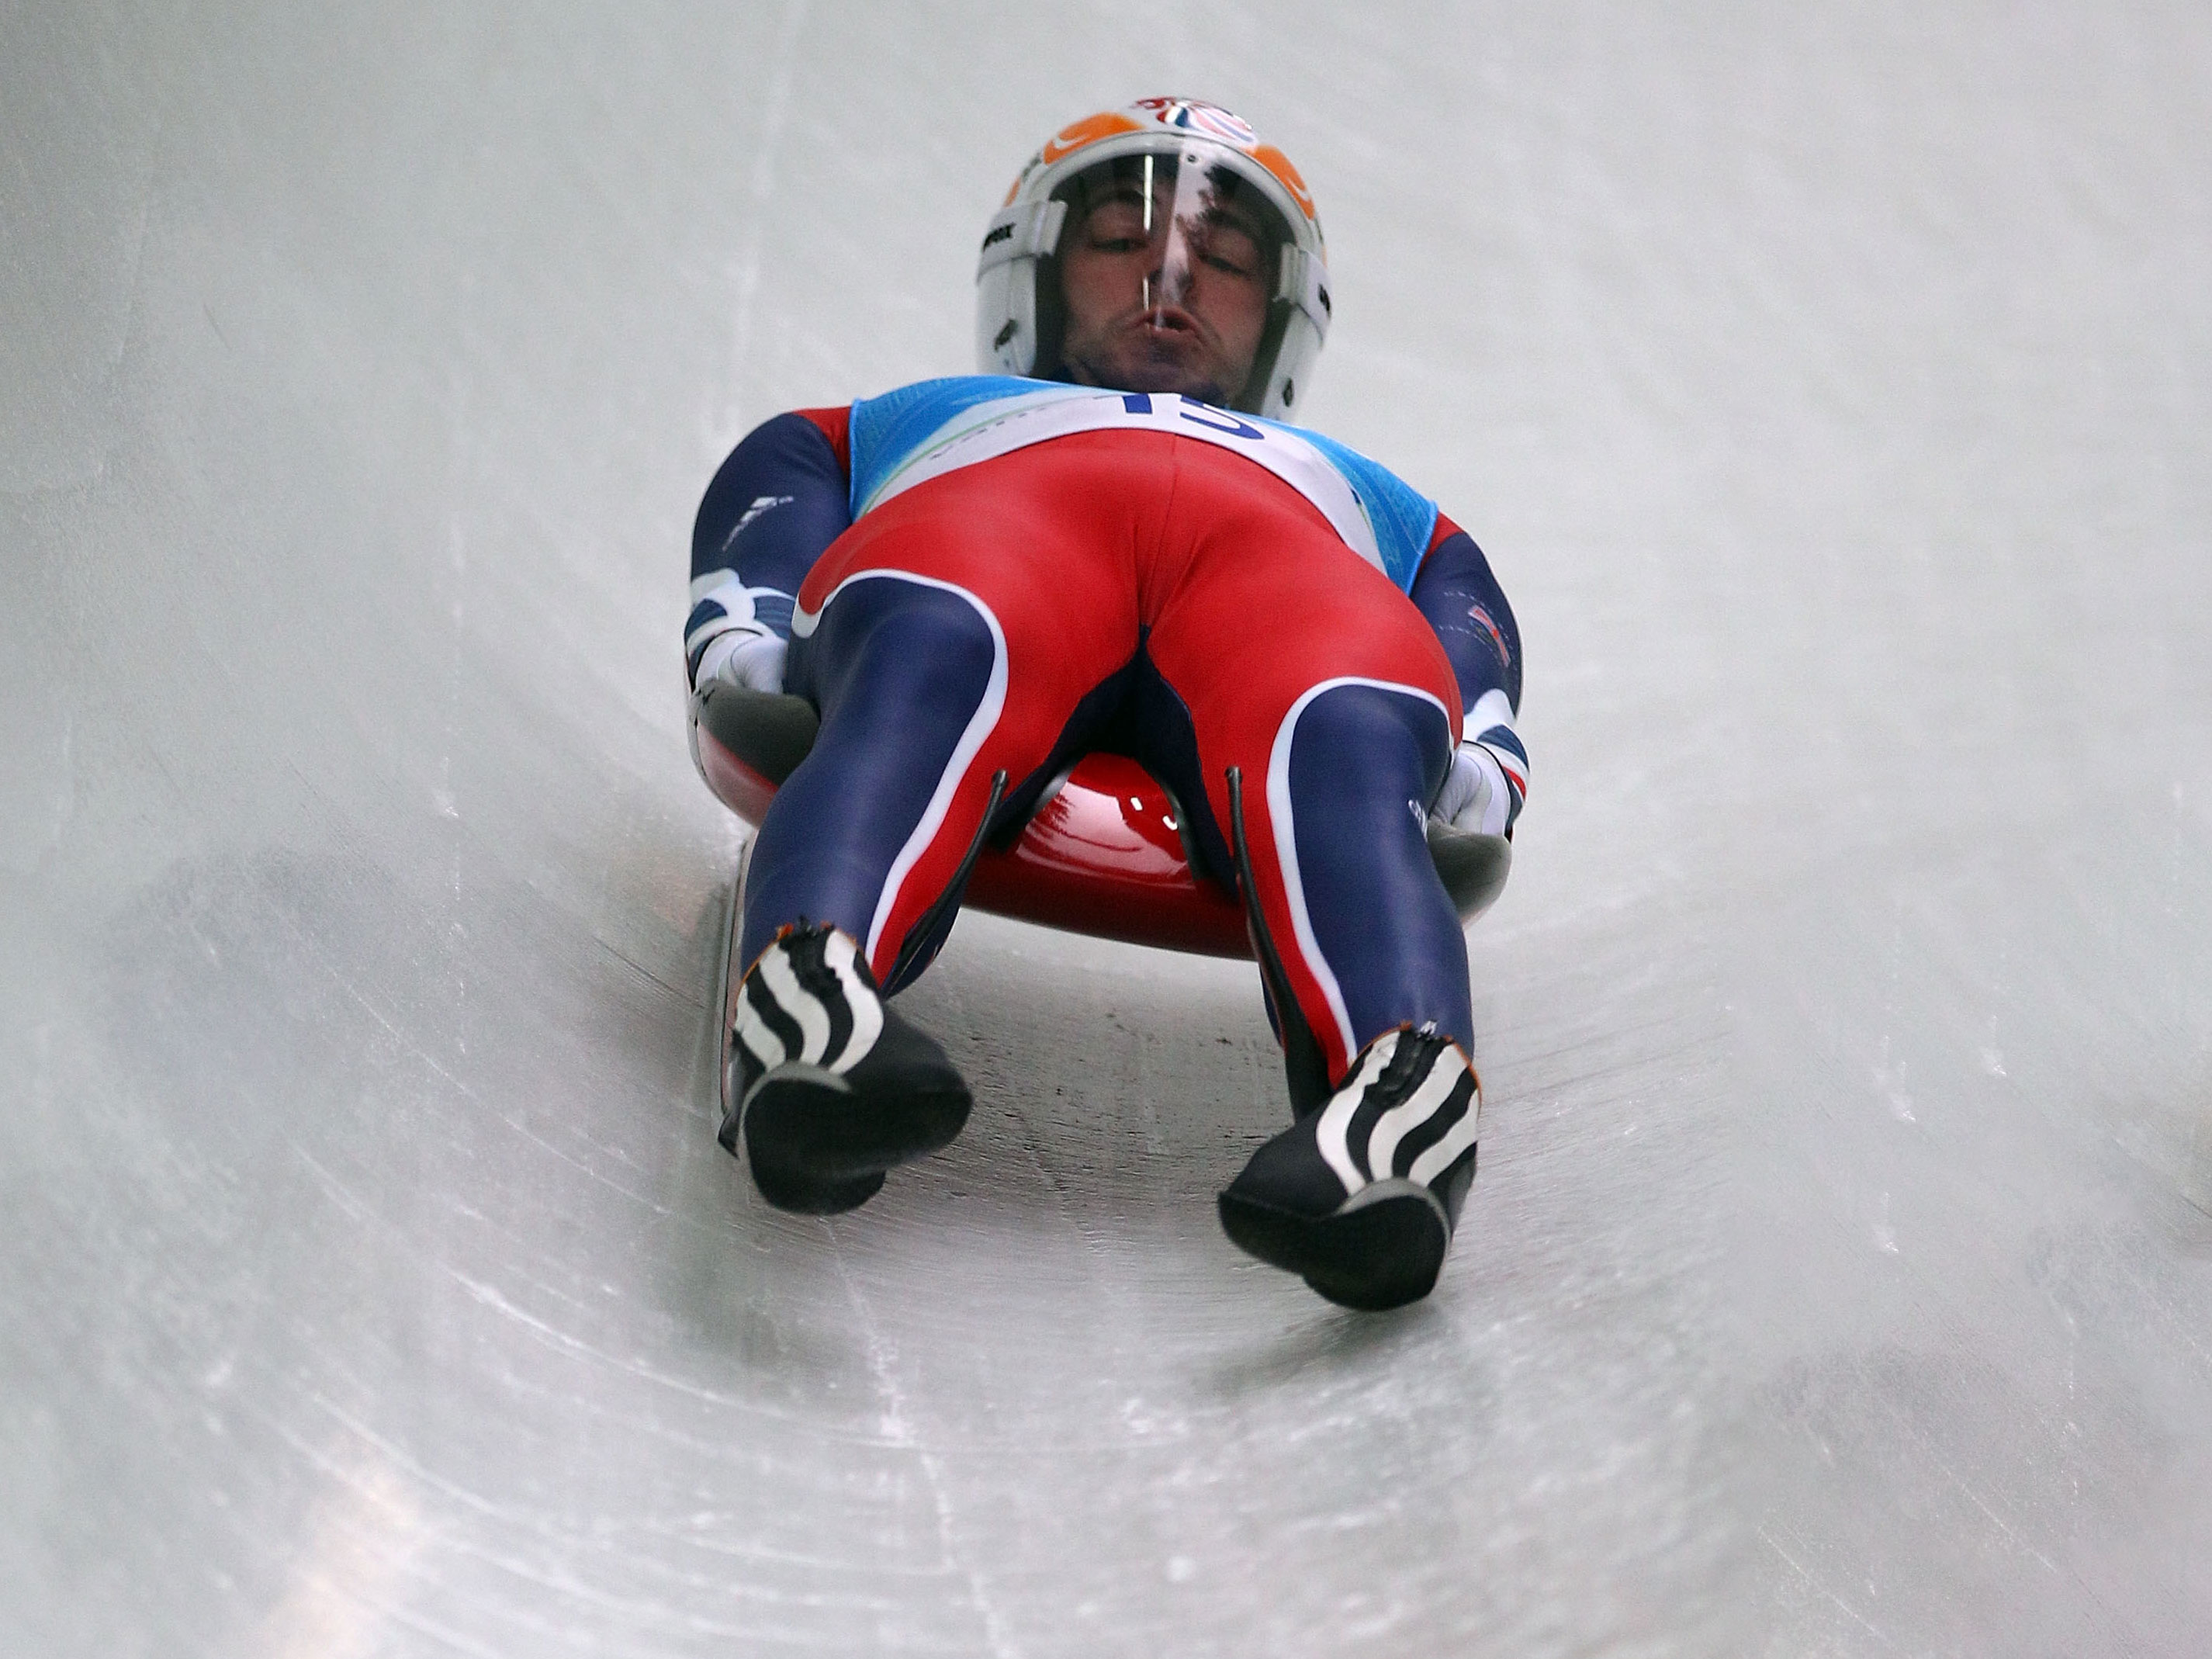 Luge: A British luger, Professional winter sports athlete, Competitive sport. 2860x2140 HD Wallpaper.